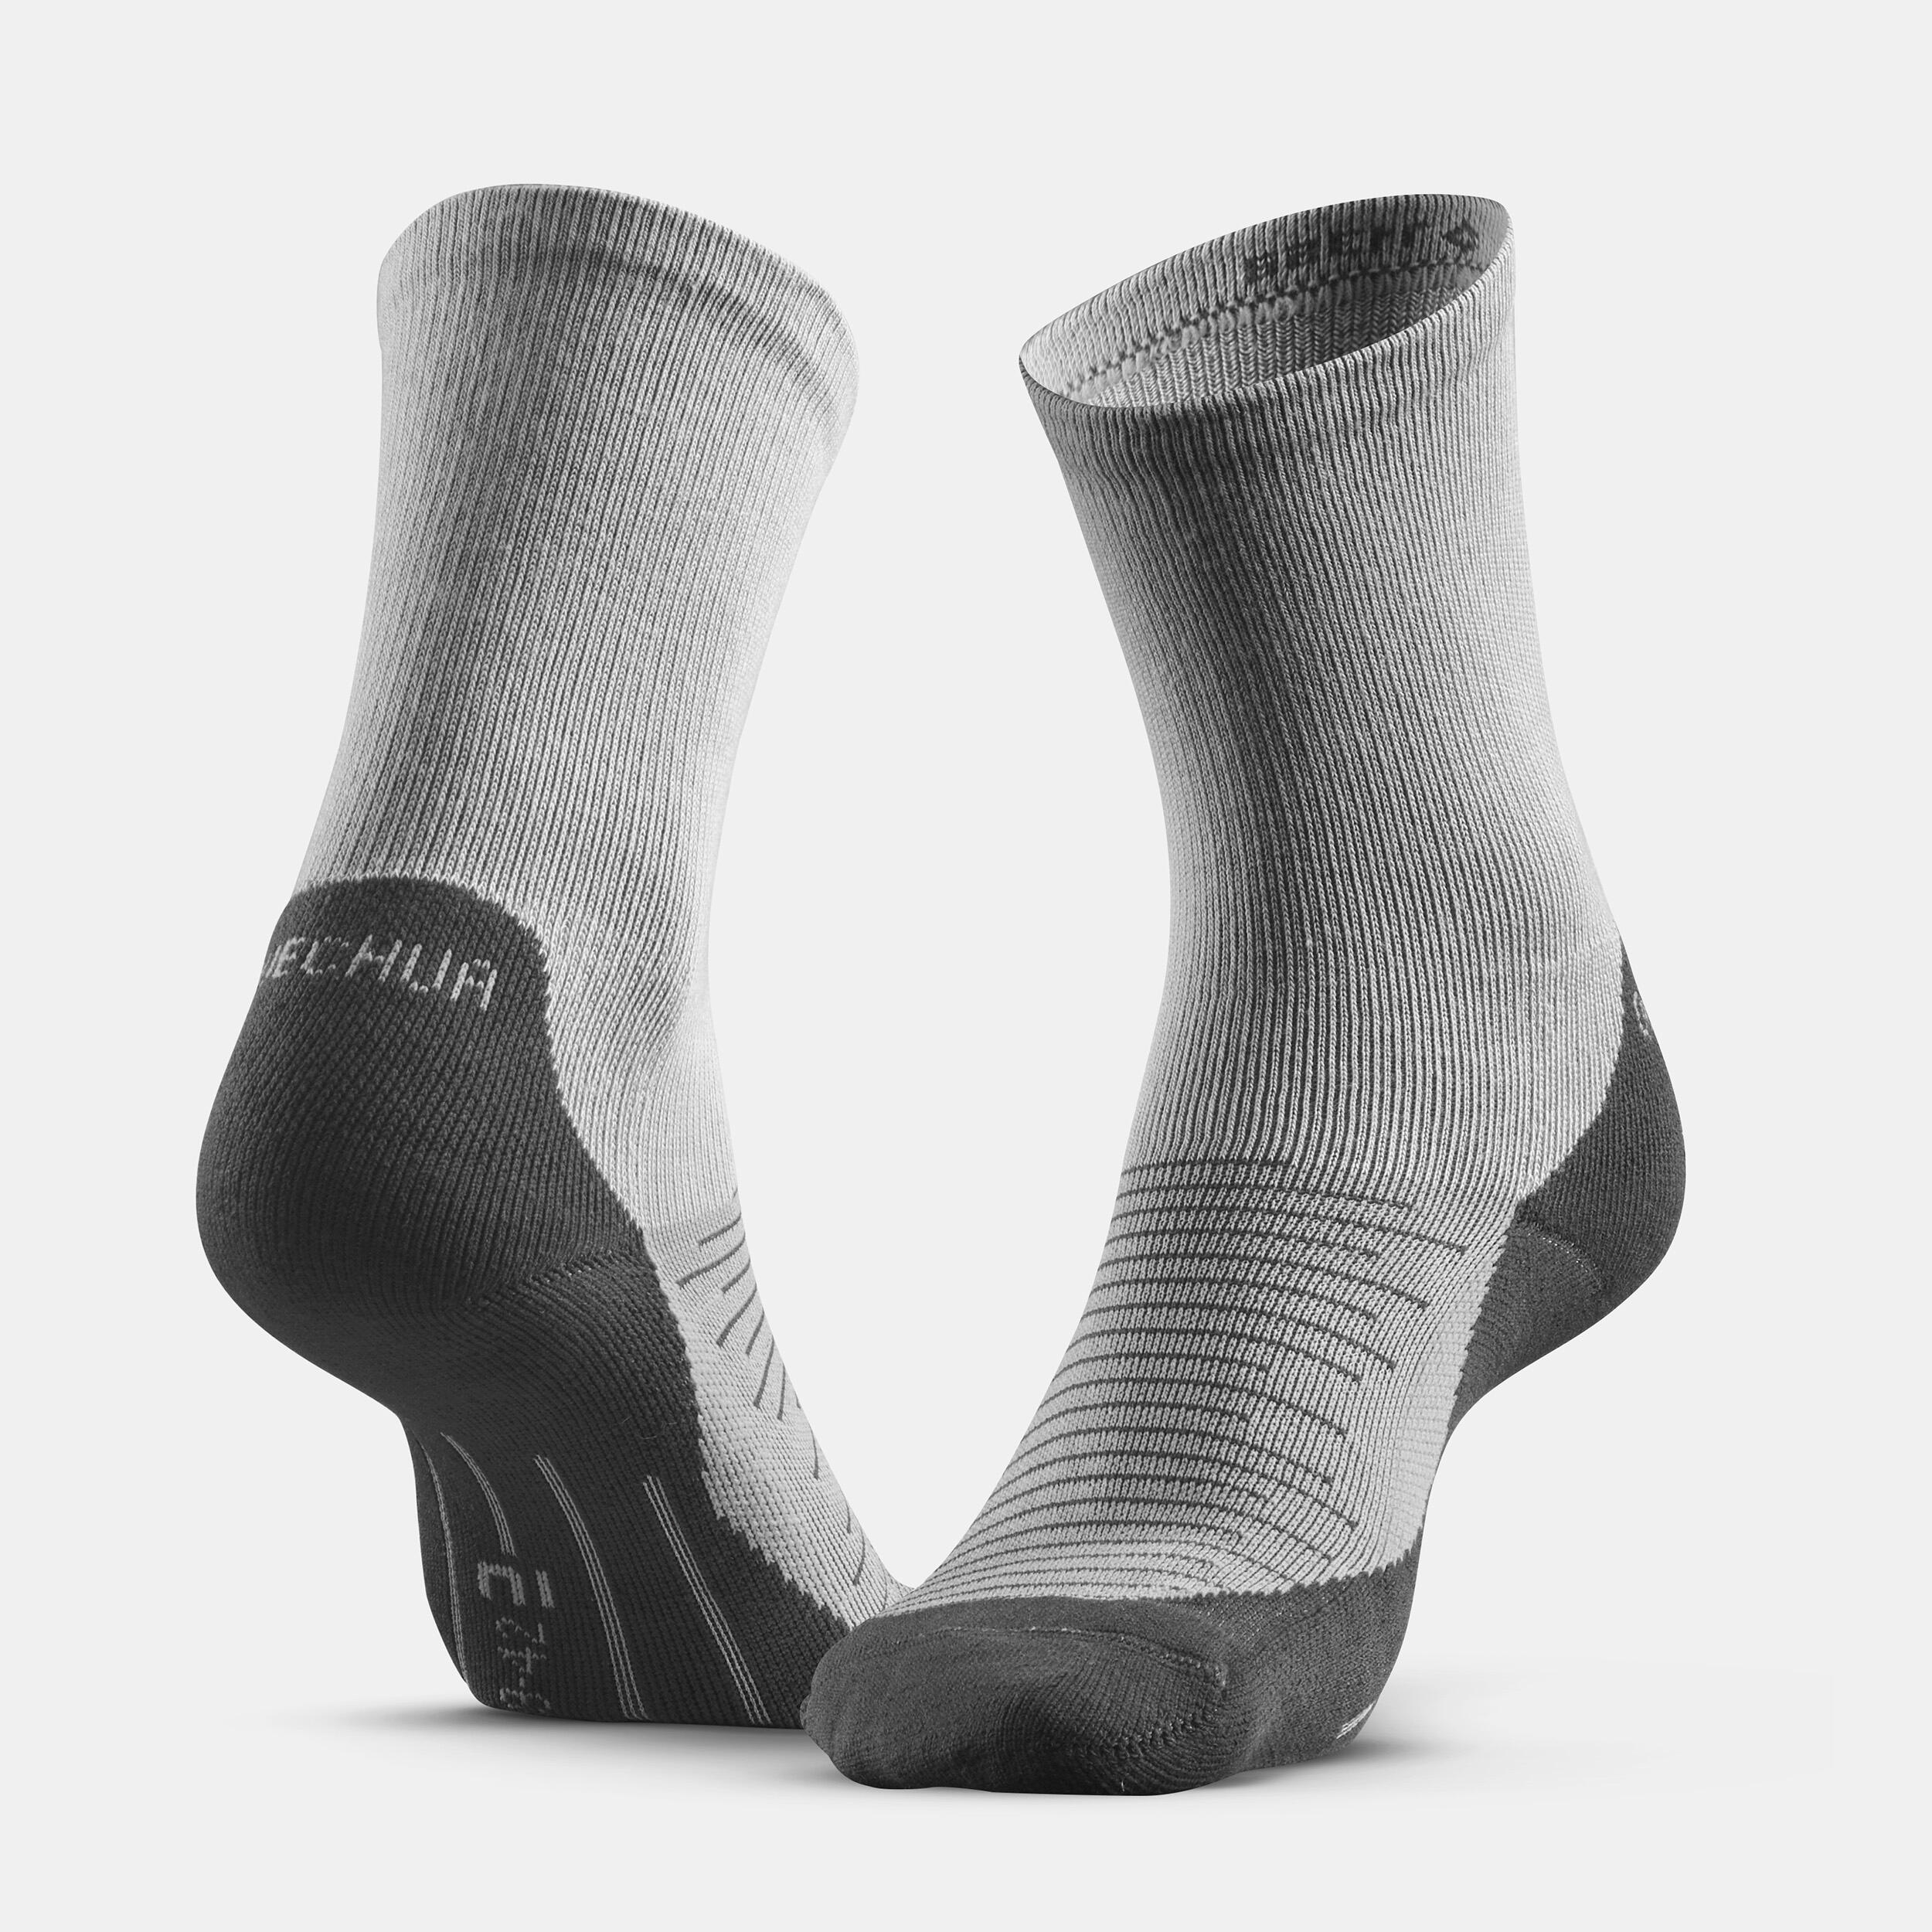 Sock Hike 100 High  - Pack of 2 pairs - Grey and Blue 2/6